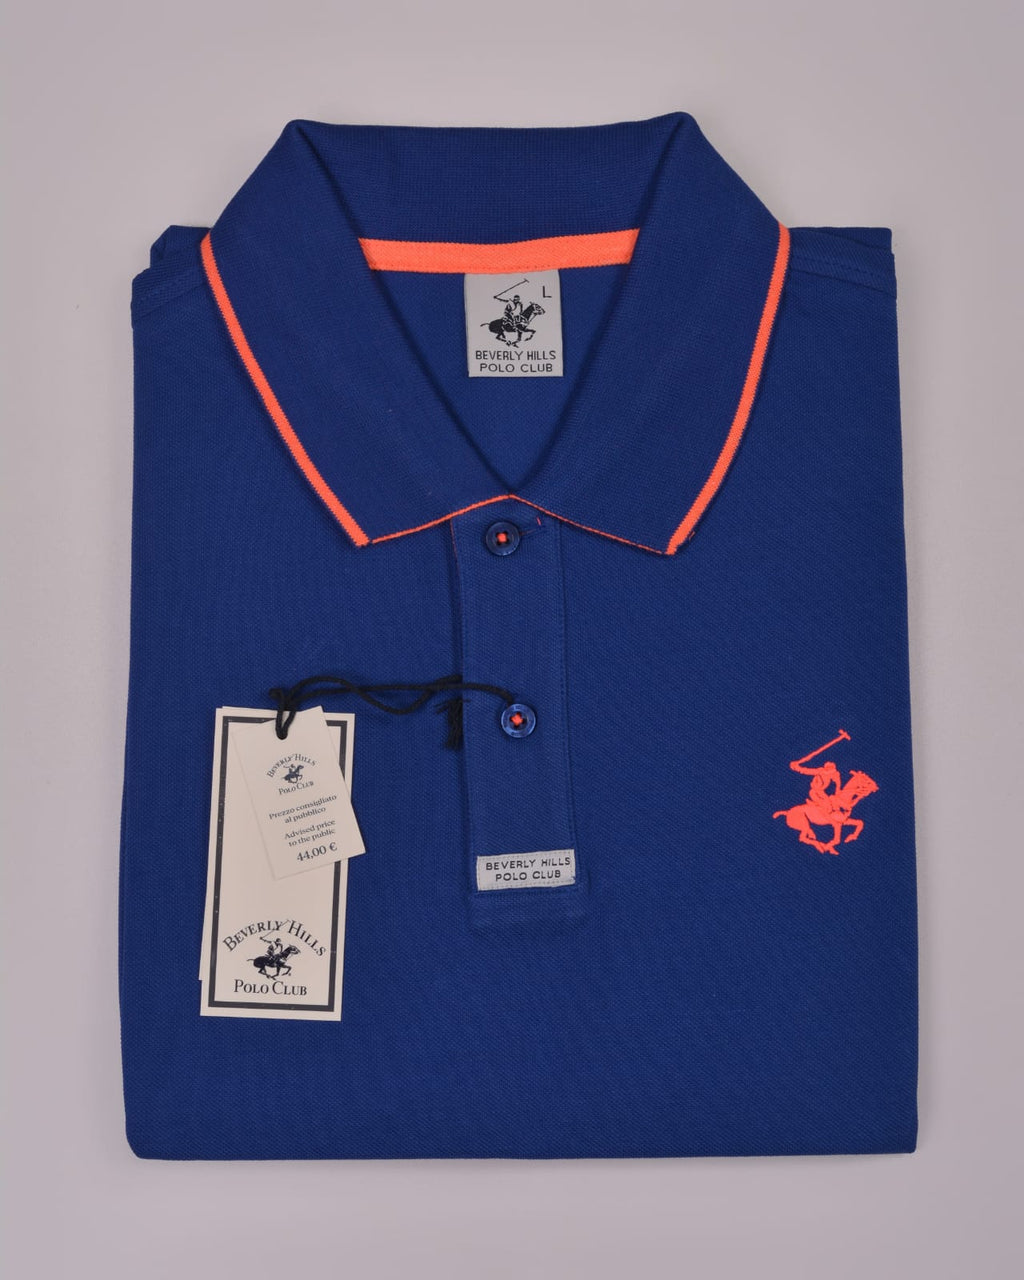 BEVERLY HILL Men's Classic Polo Shirt CHEST LOGO